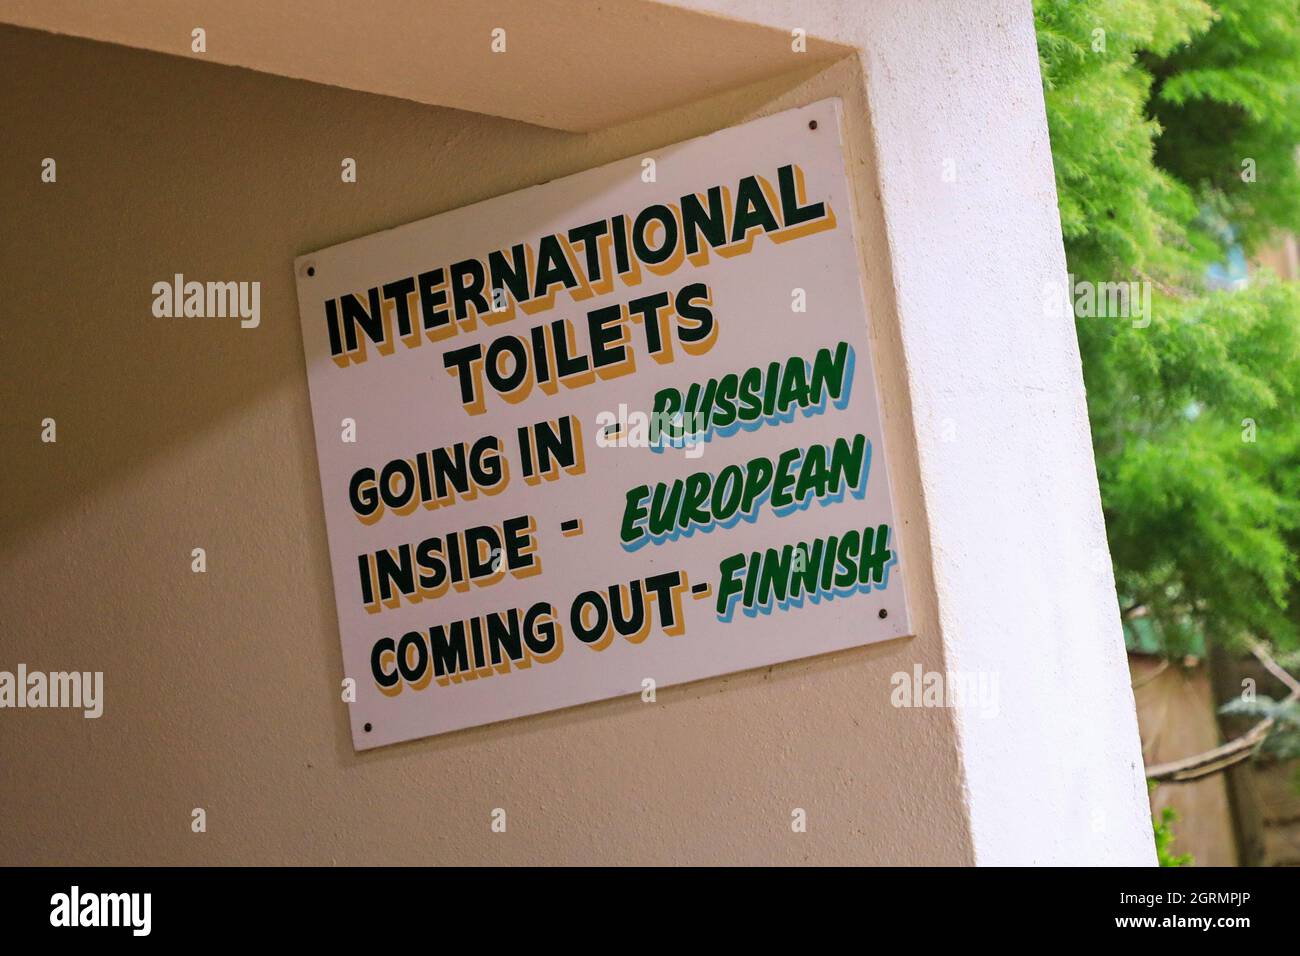 A sign, saying 'International toilets - going in, Russian; inside, European; coming out, Finnish' England, UK Stock Photo